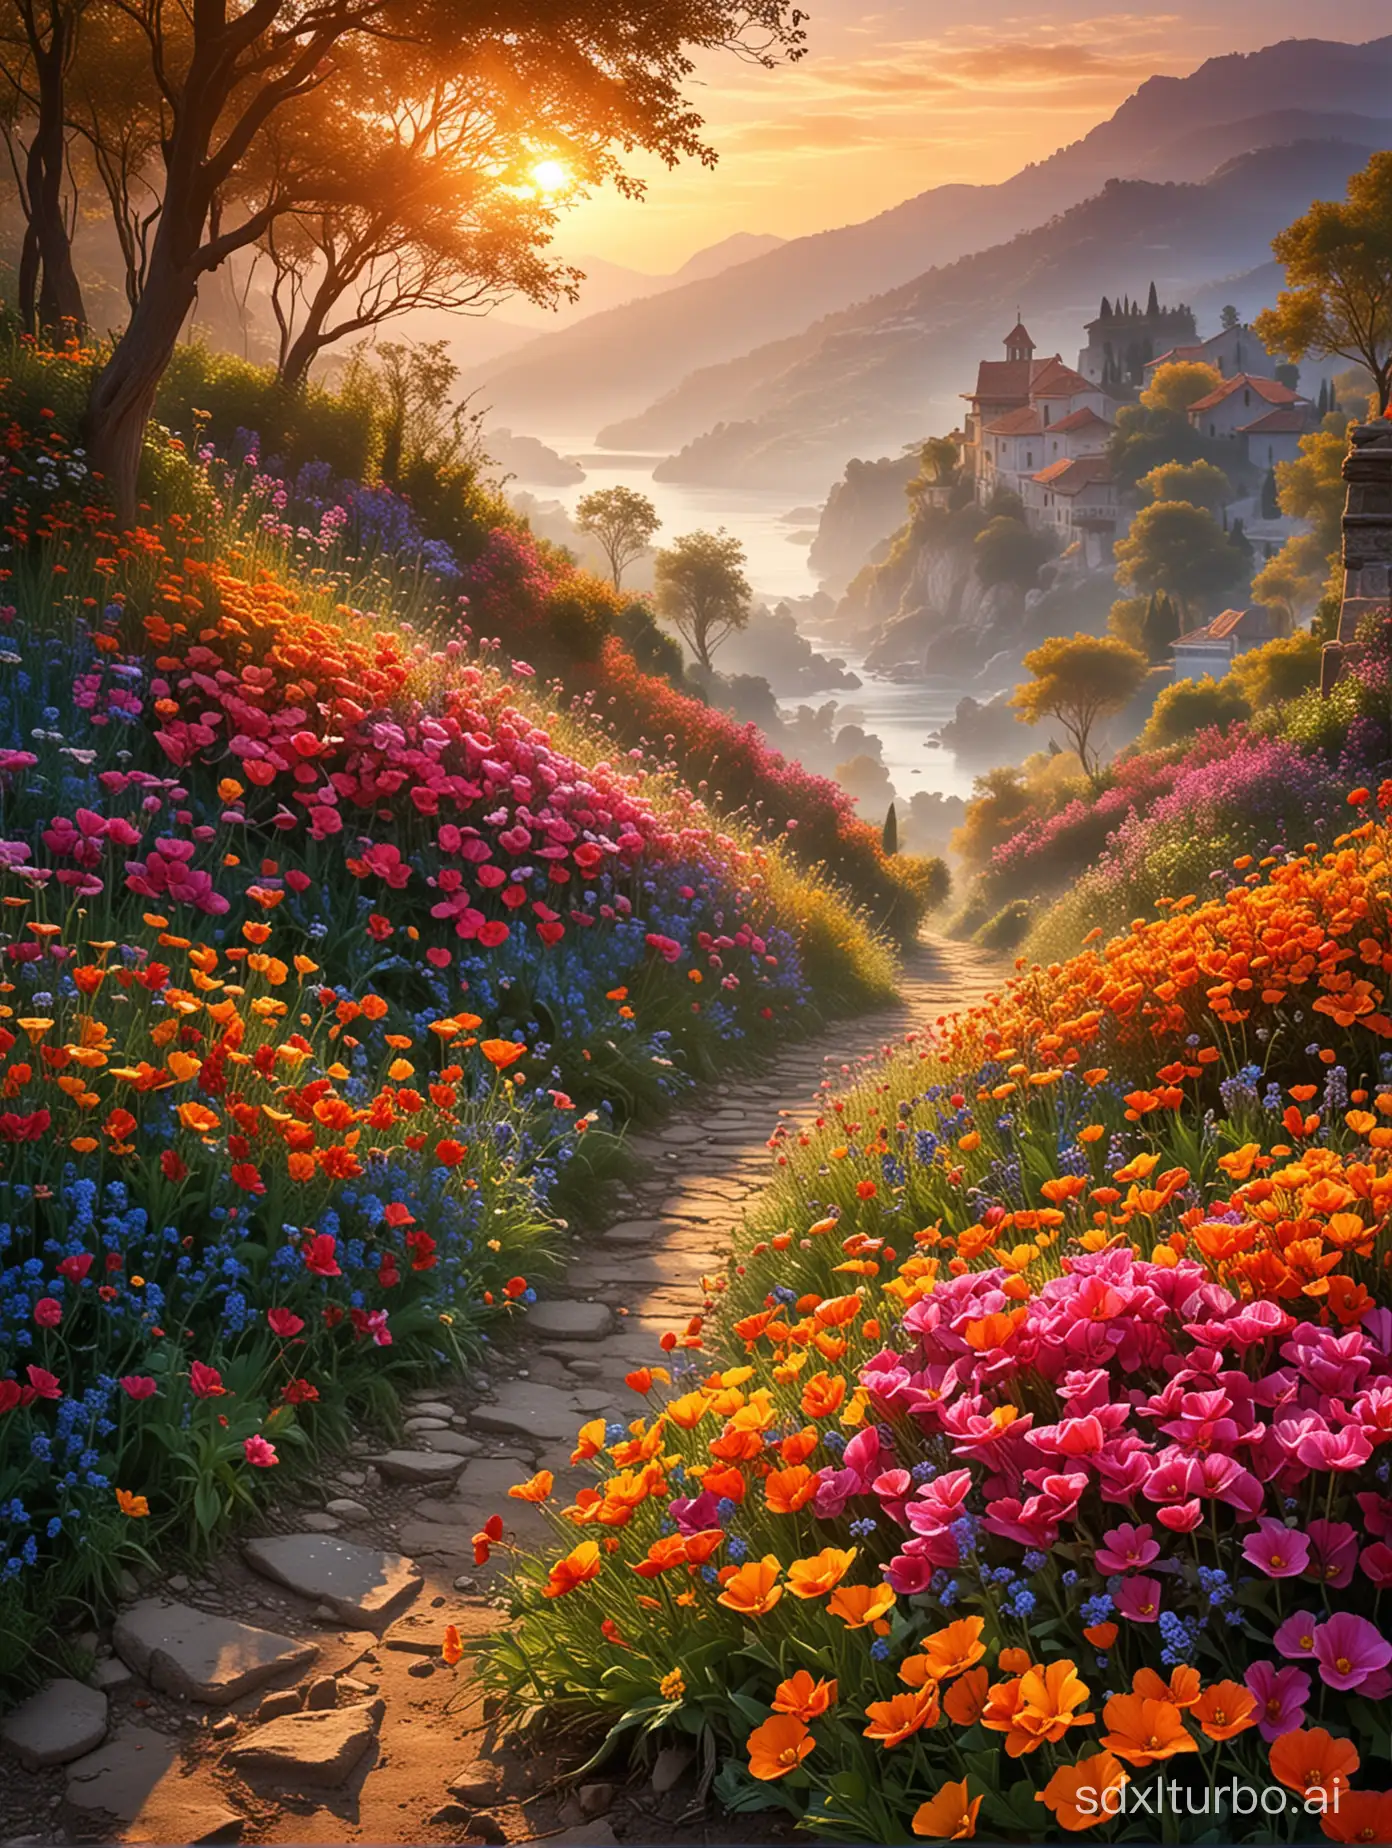 Morning, flowers, mysterious, colorful, beautiful landscapes, world heritage, masterpiece